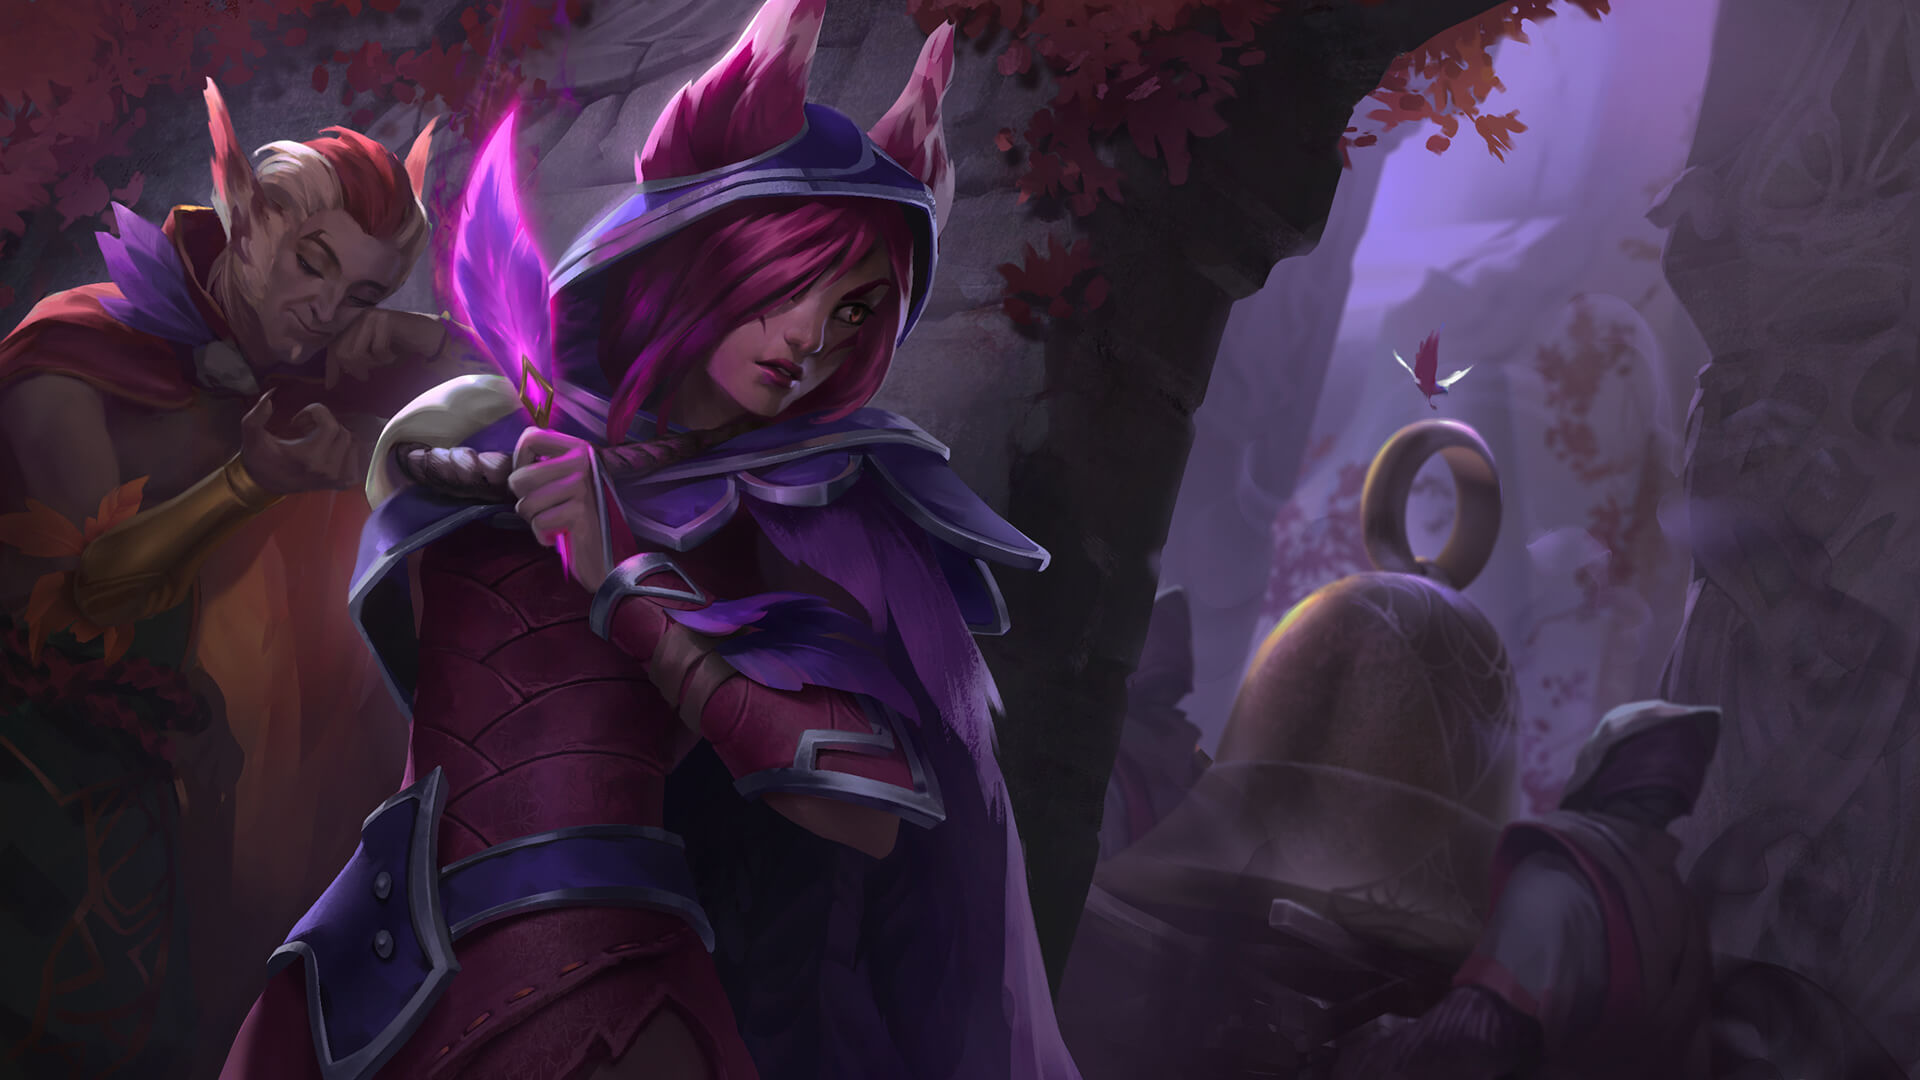 Xayah and Rakan working together in the forest